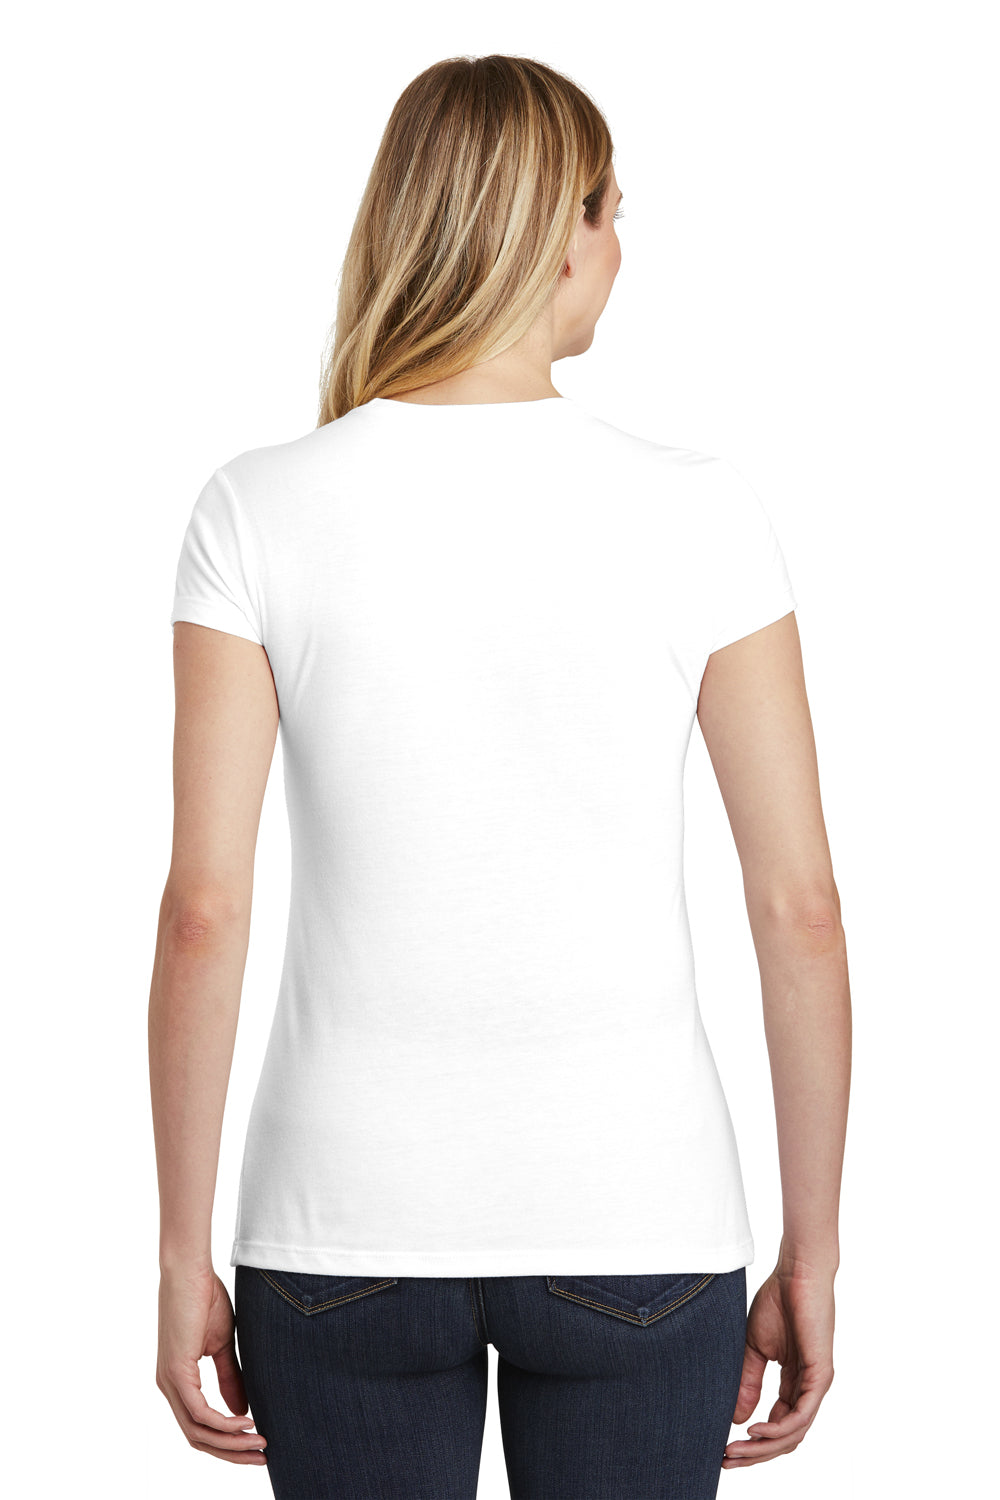 District DT155 Womens Fitted Perfect Tri Short Sleeve Crewneck T-Shirt White Back